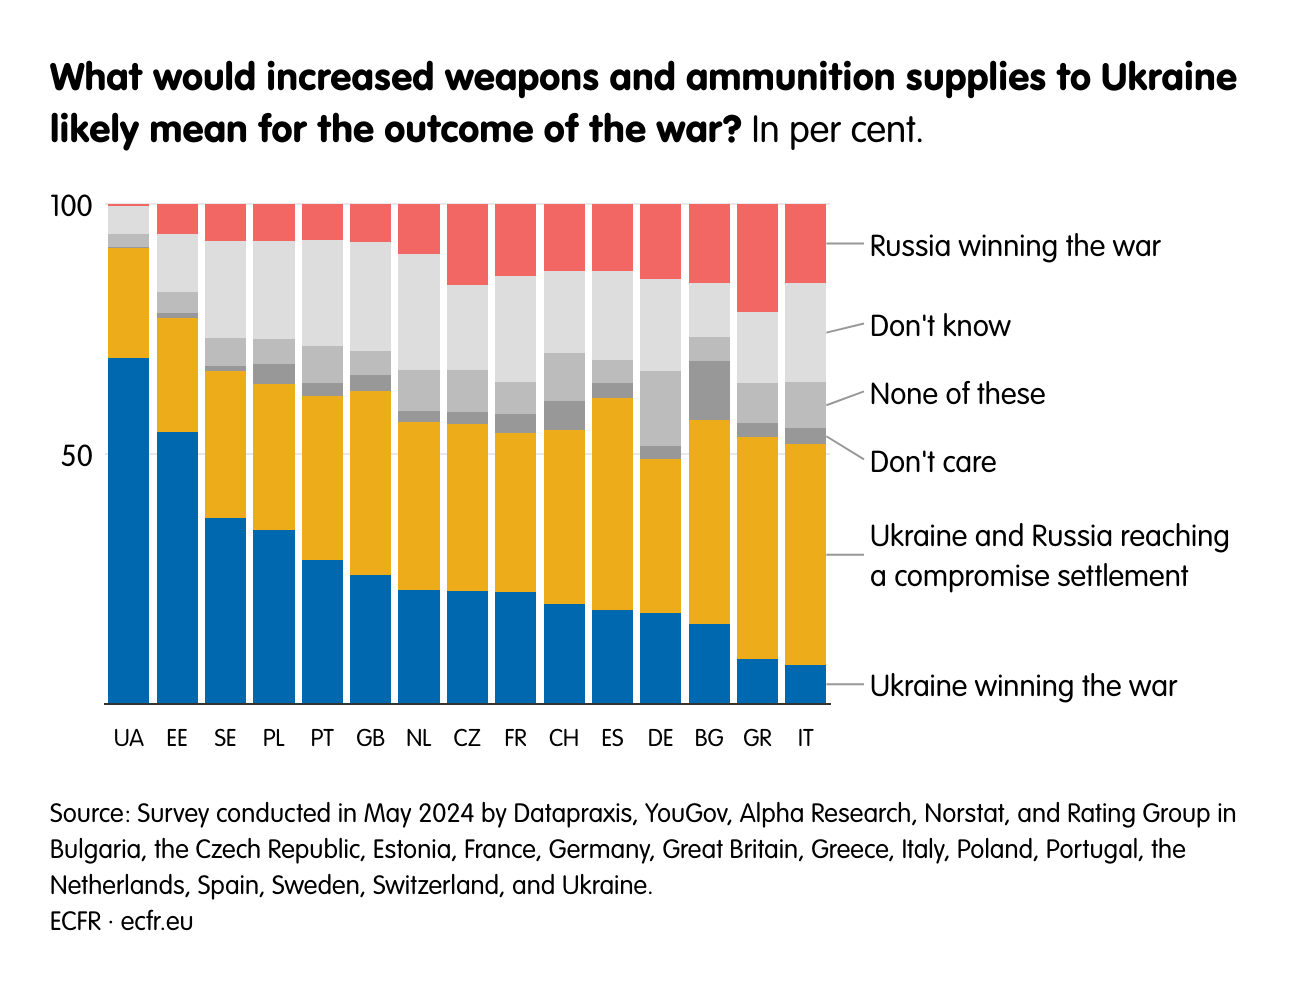 What would increased weapons and ammunition supplies to Ukraine likely mean for the outcome of the war?